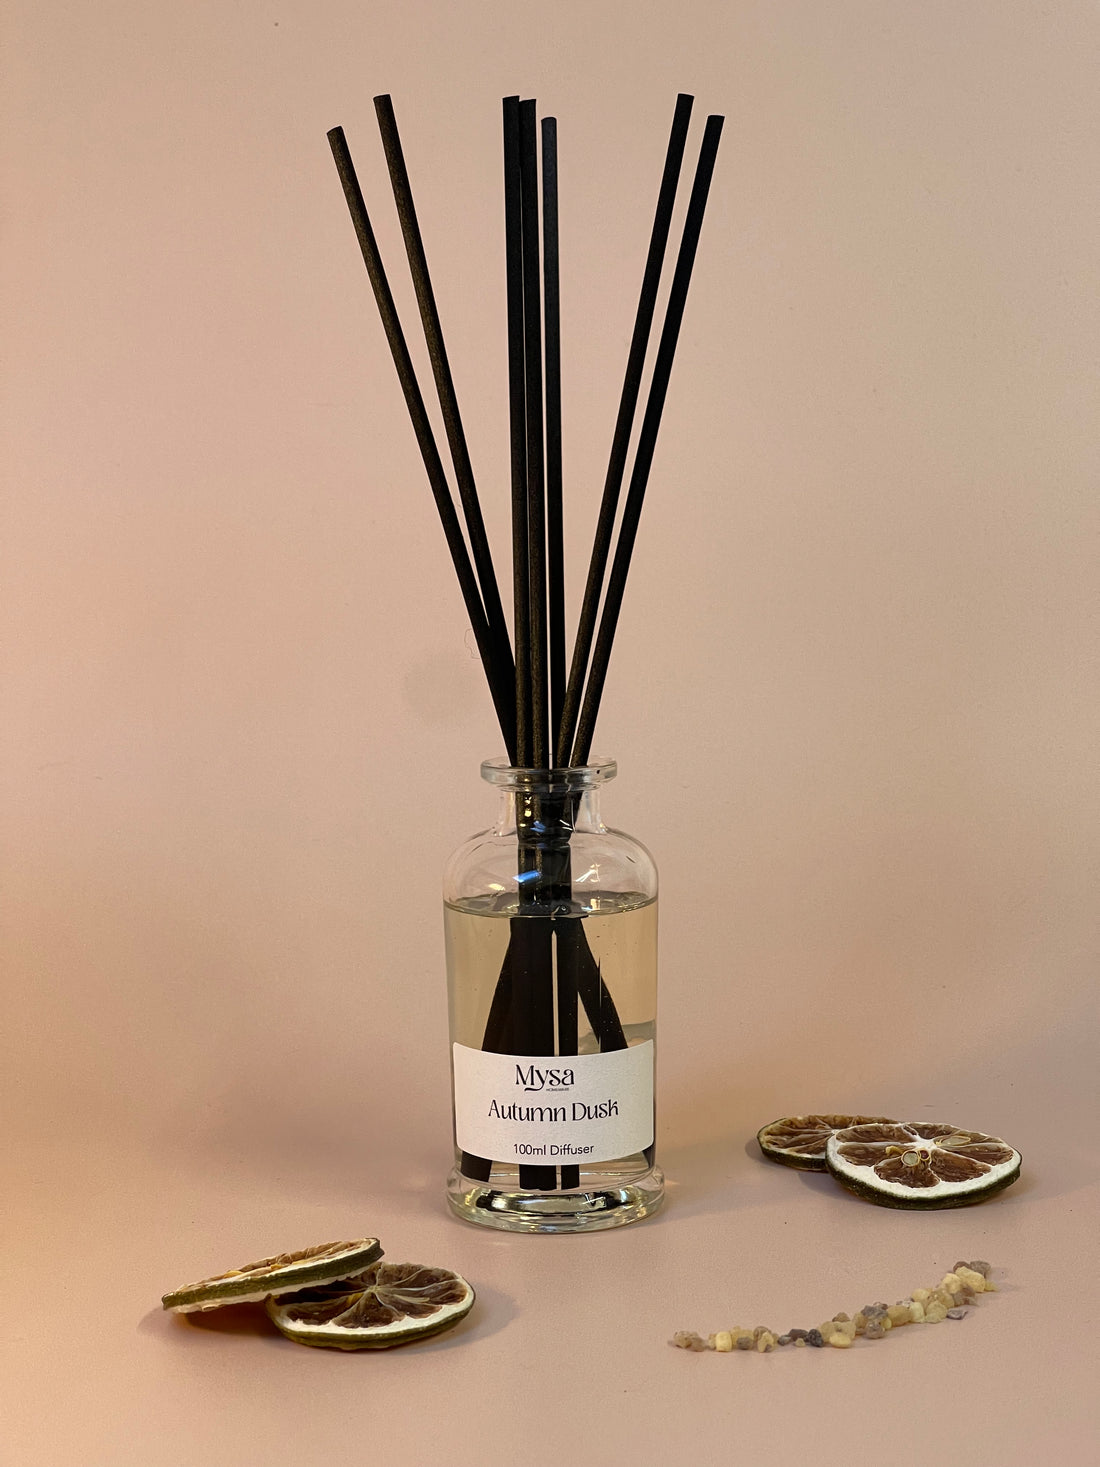 Autumn Dusk luxury reed diffuser in gift box, featuring a vegan base oil infused with frankincense &amp; bergamot fragrance.